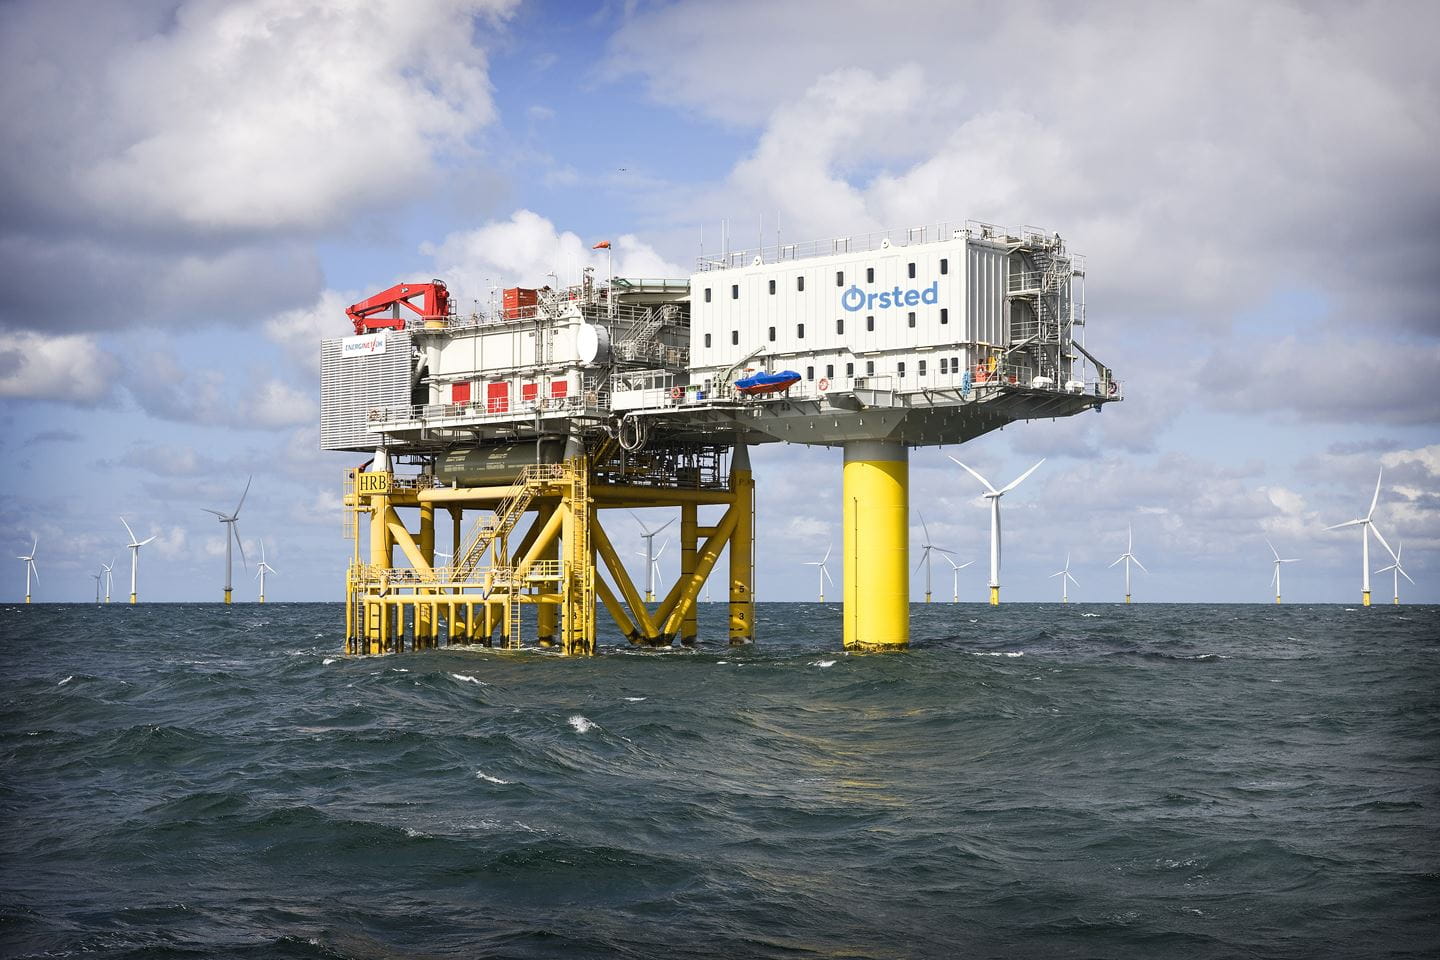 The Horns Rev 2 platform with the offshore wind farm in the background